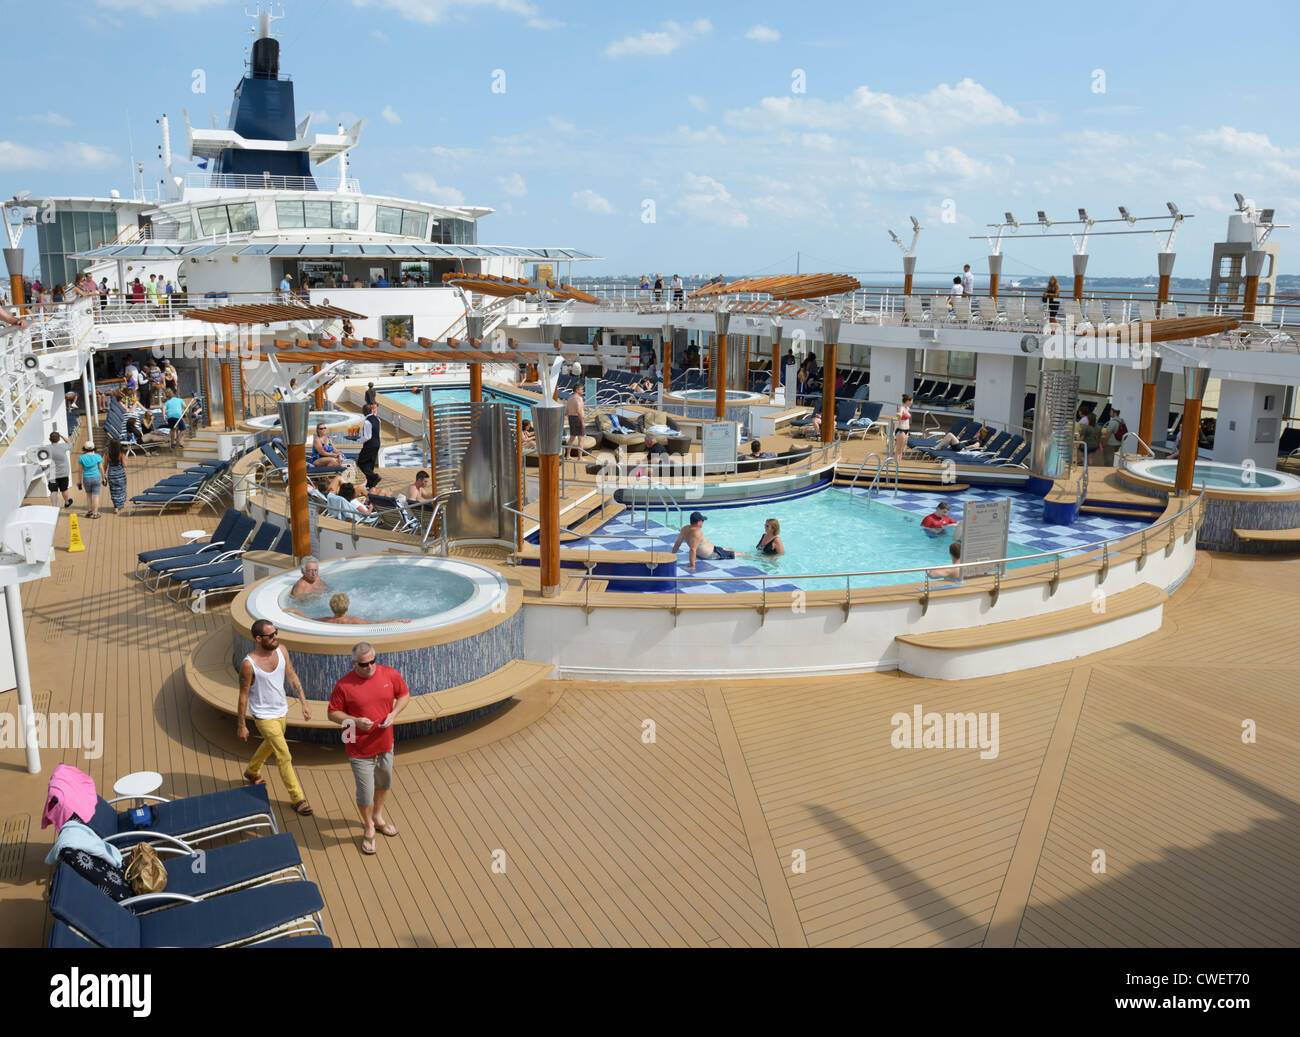 Upper deck of cruise ship Stock Photo